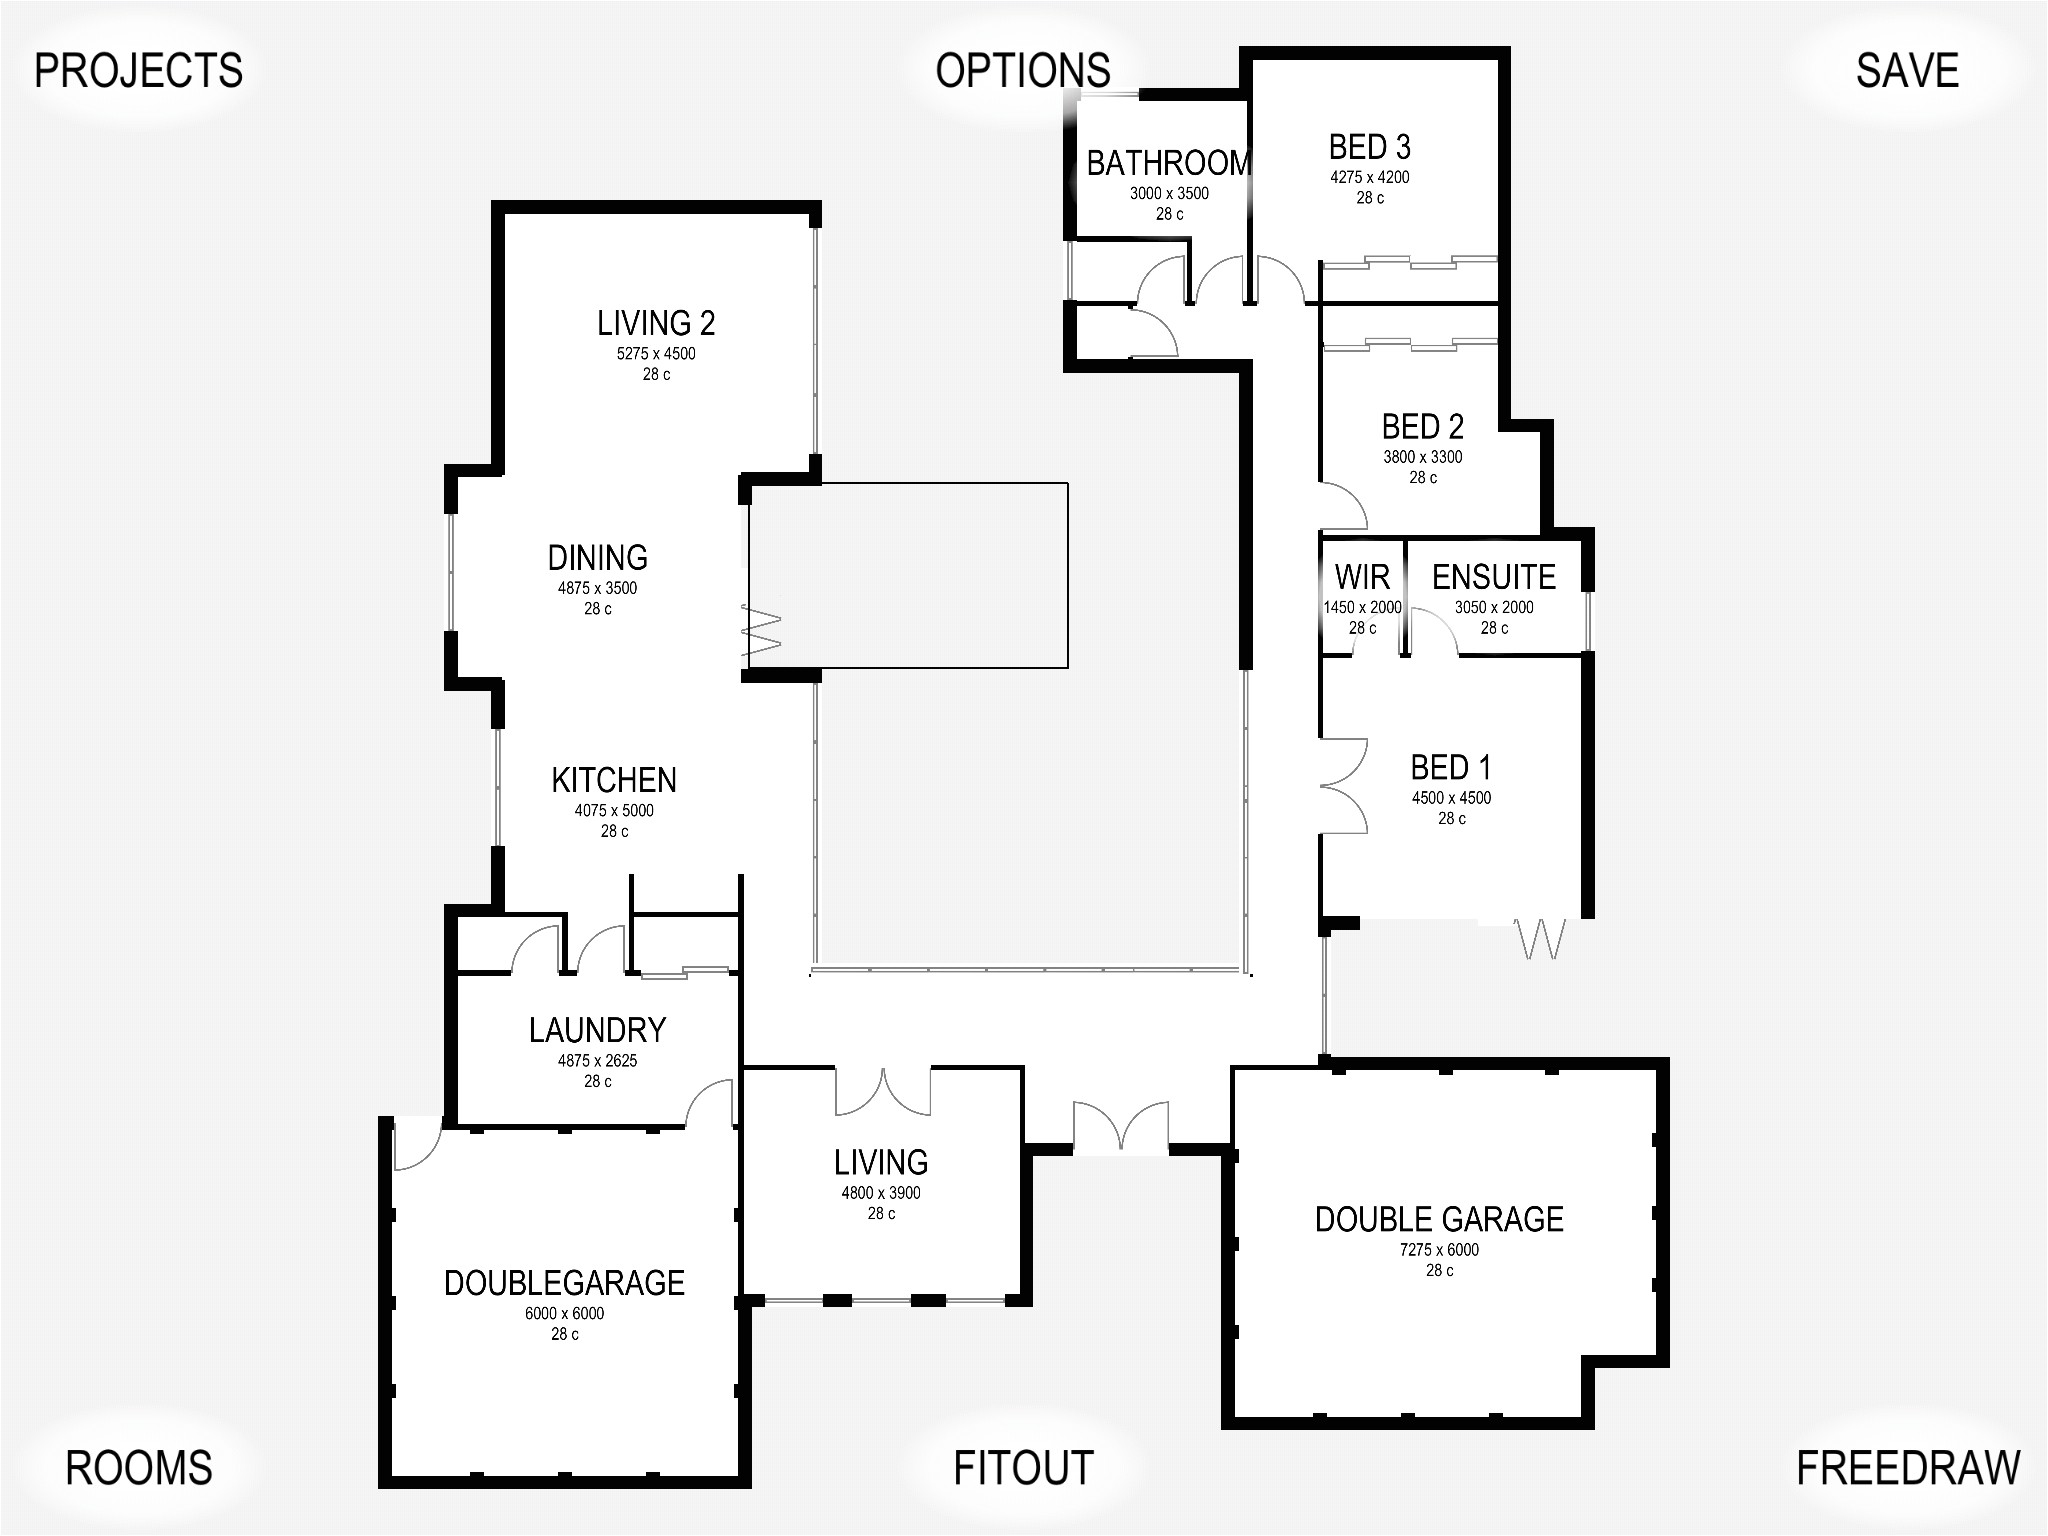 online floor plan maker my own view bungalow for a interior living creating layouts in rambler houses program draw custom design